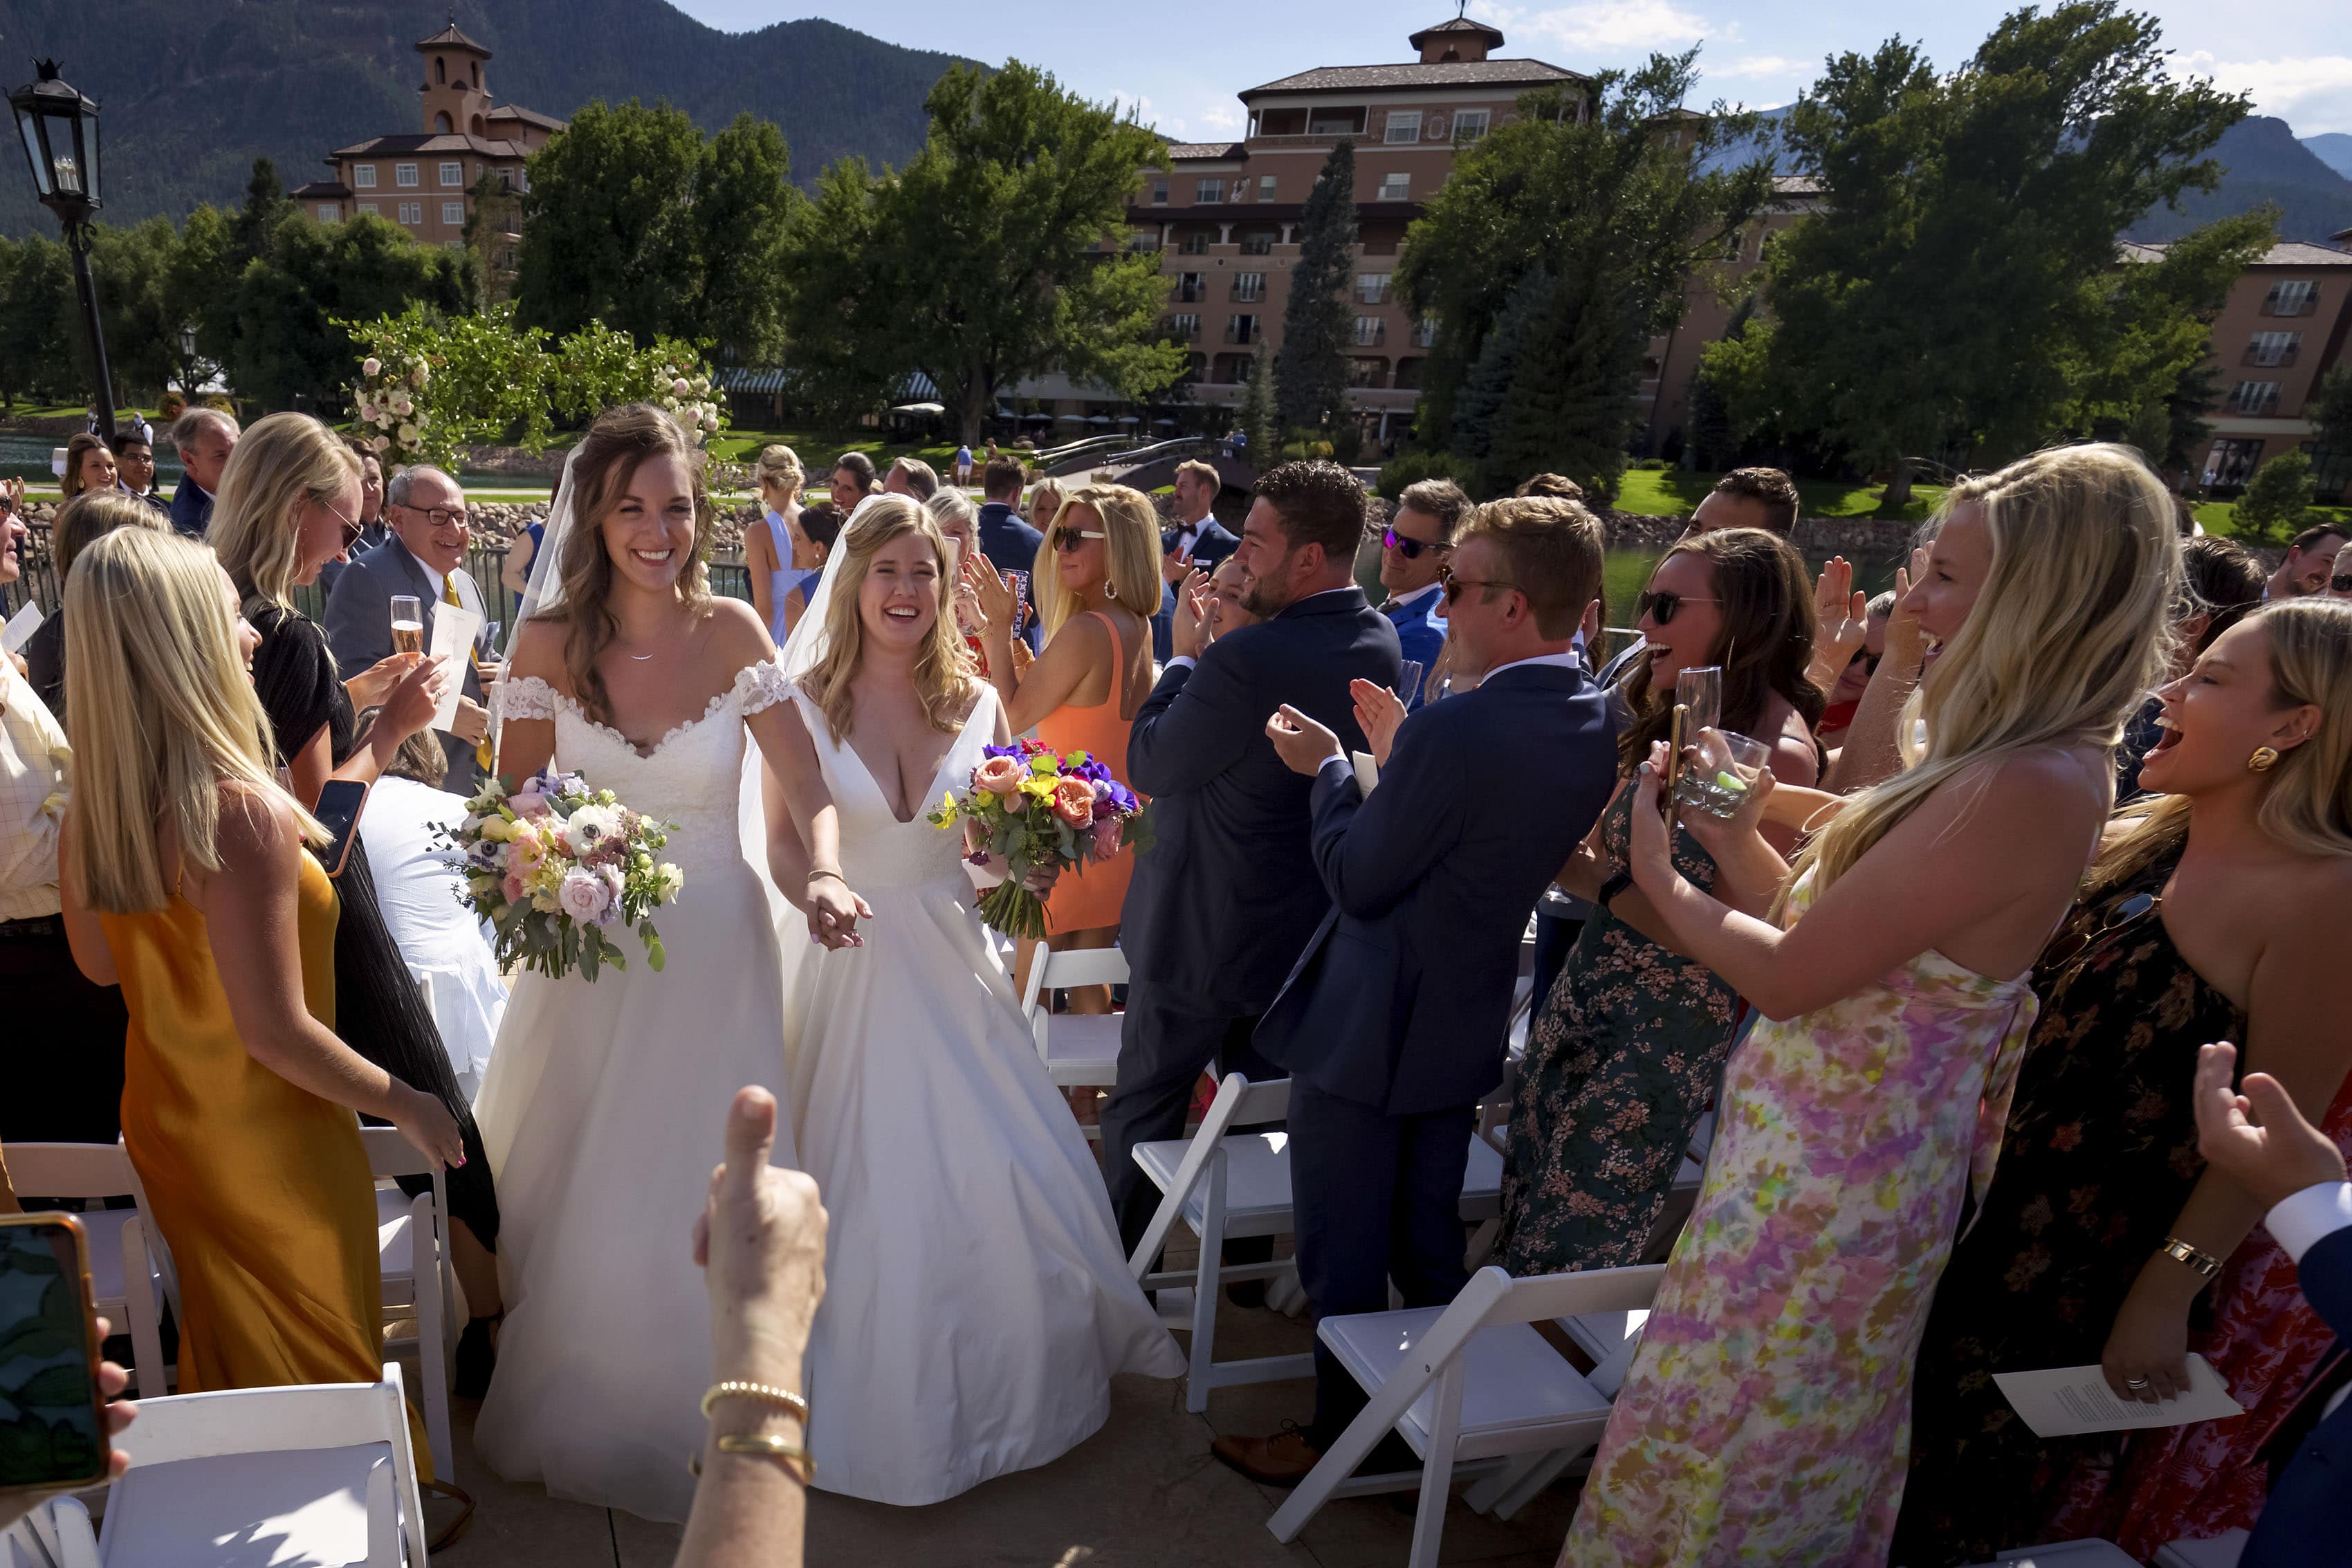 Newlywed brides walk down the aisle following their wedding ceremony at The Broadmoor in Colorado Springs